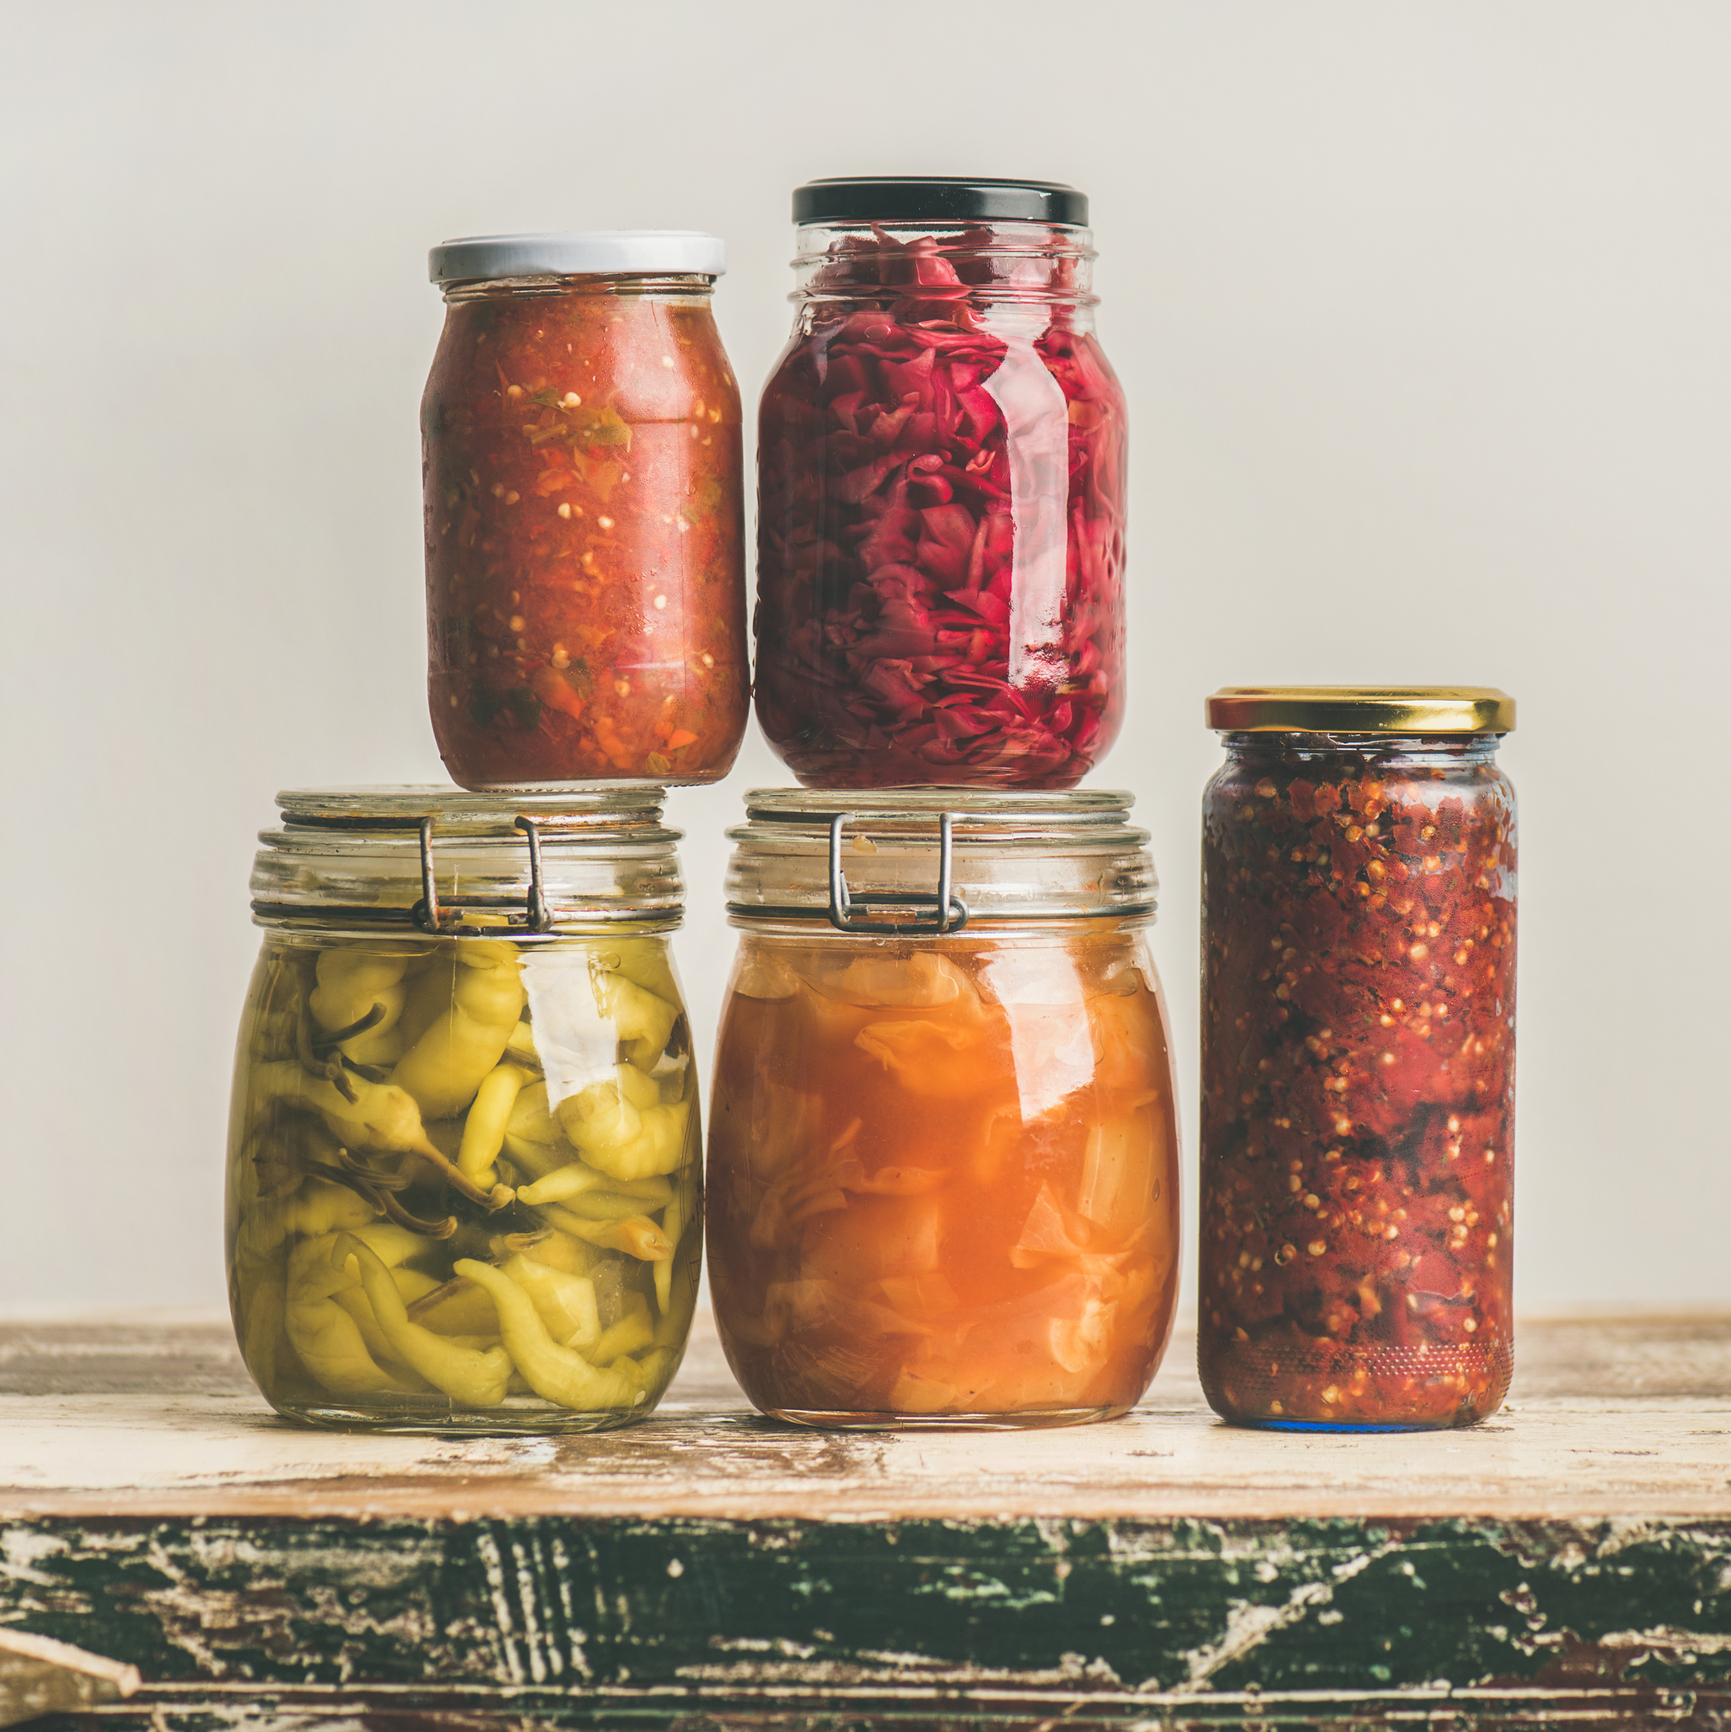 Colourful and good for you, fermented foods are the future. 